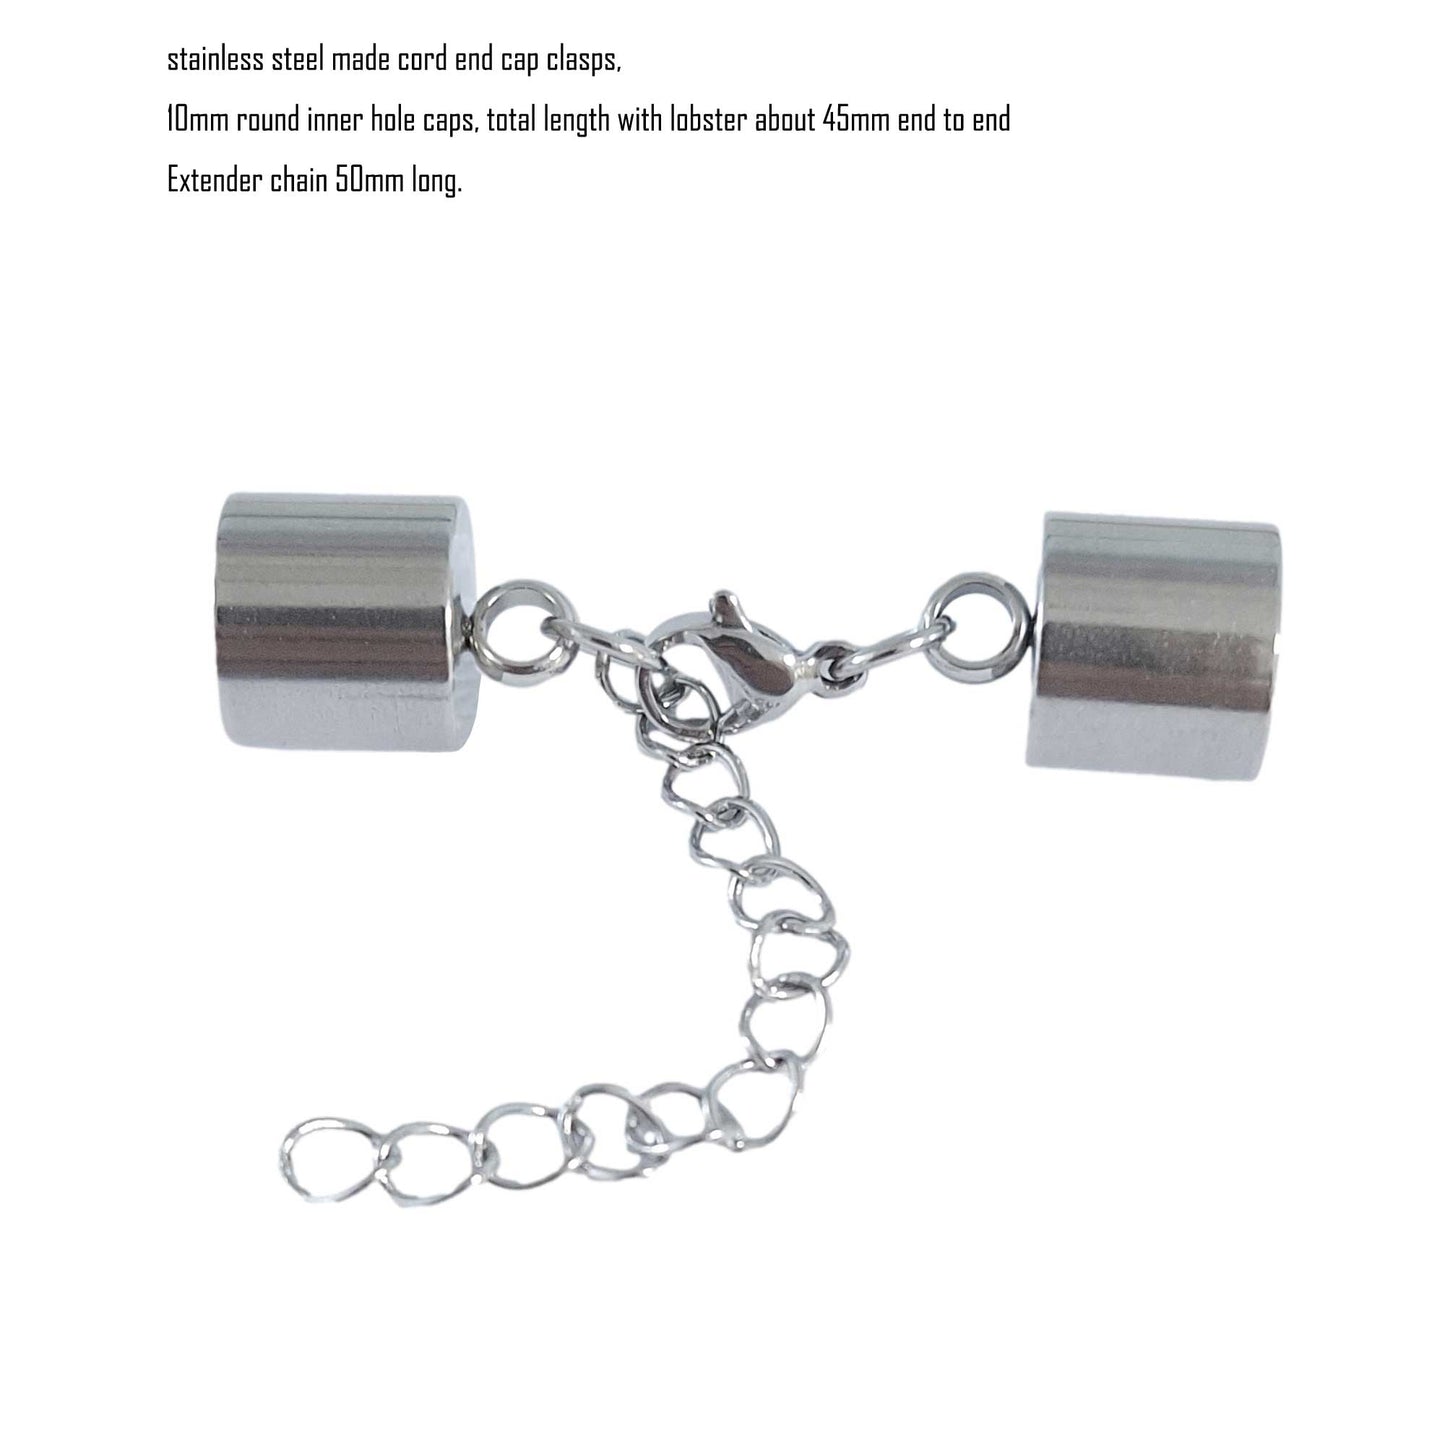 3 Pieces Stainless Steel Cord End Cap Clasps with Lobster and Extender Chain Bracelet Necklace Making 2mm 3mm 4mm 8mm